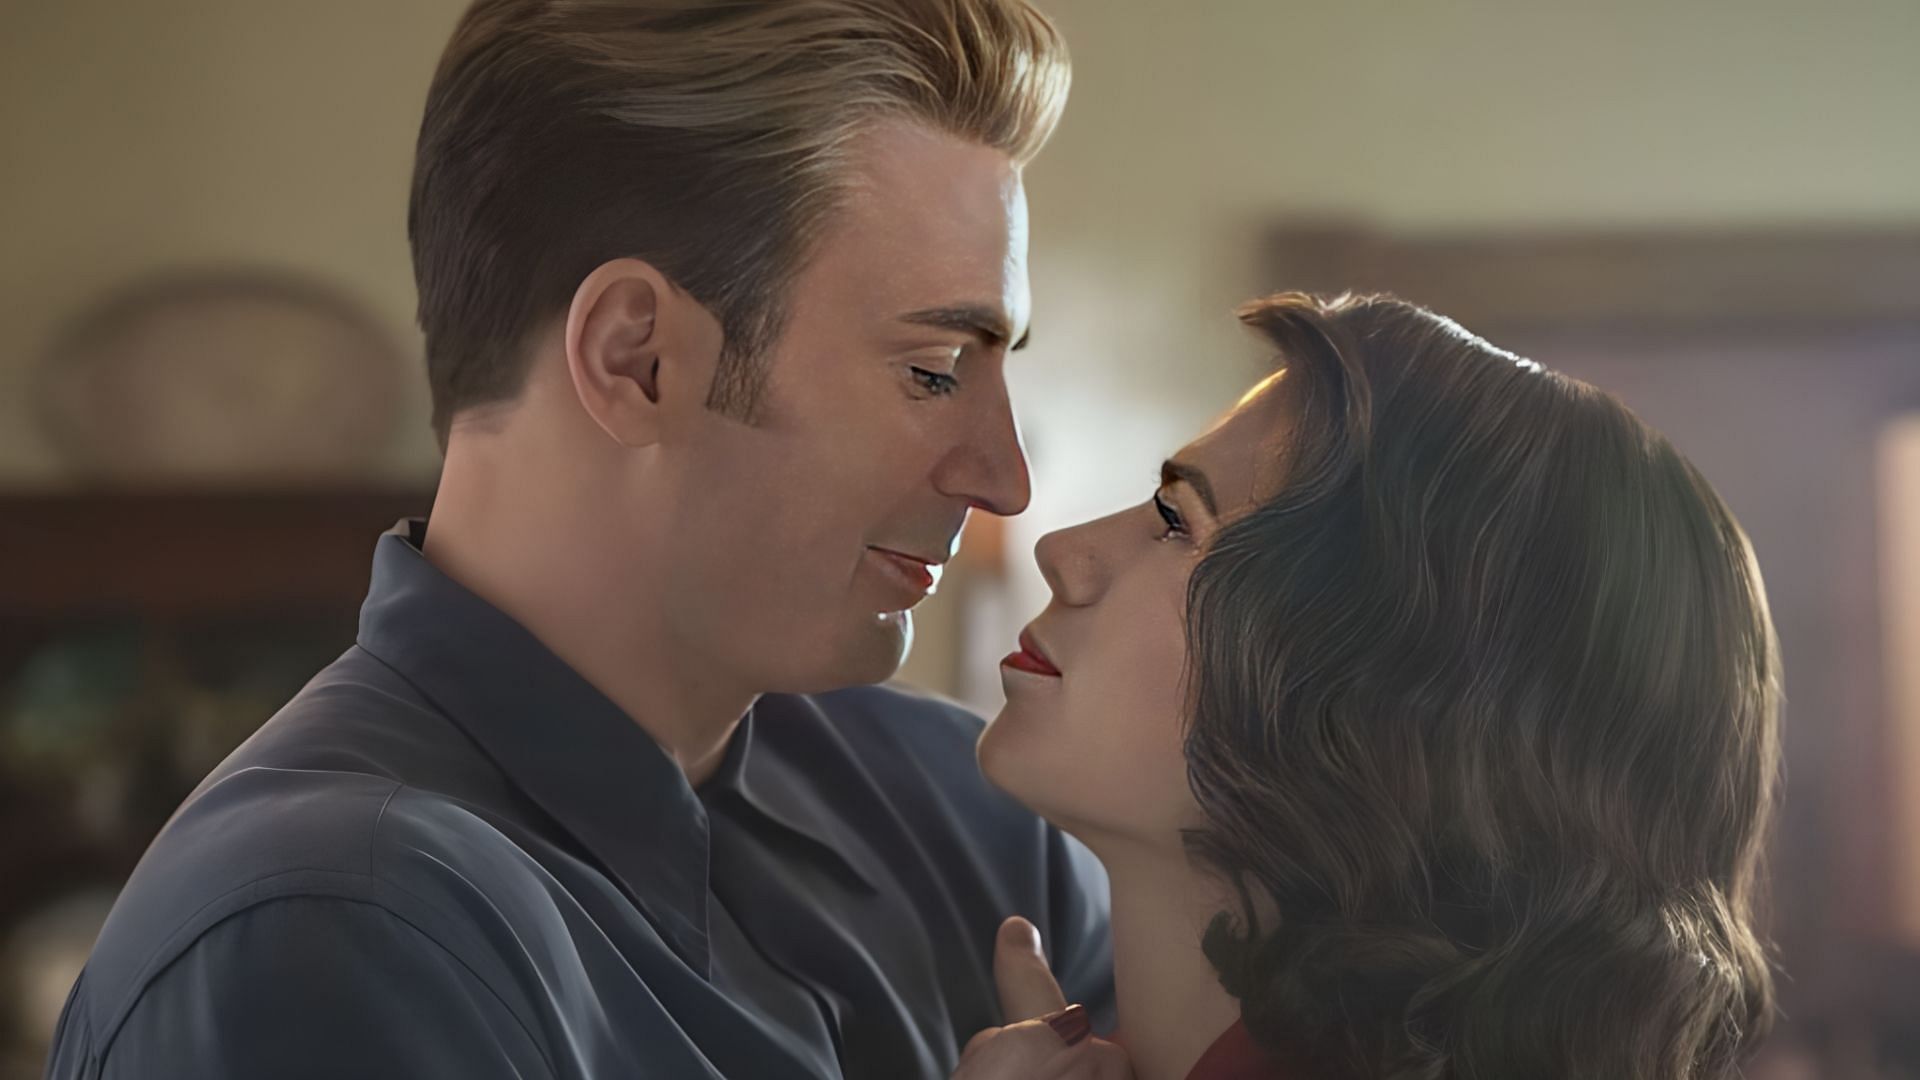 Peggy and Steve&#039;s bond endured and continued to impact them and those around them. (Image via Marvel)